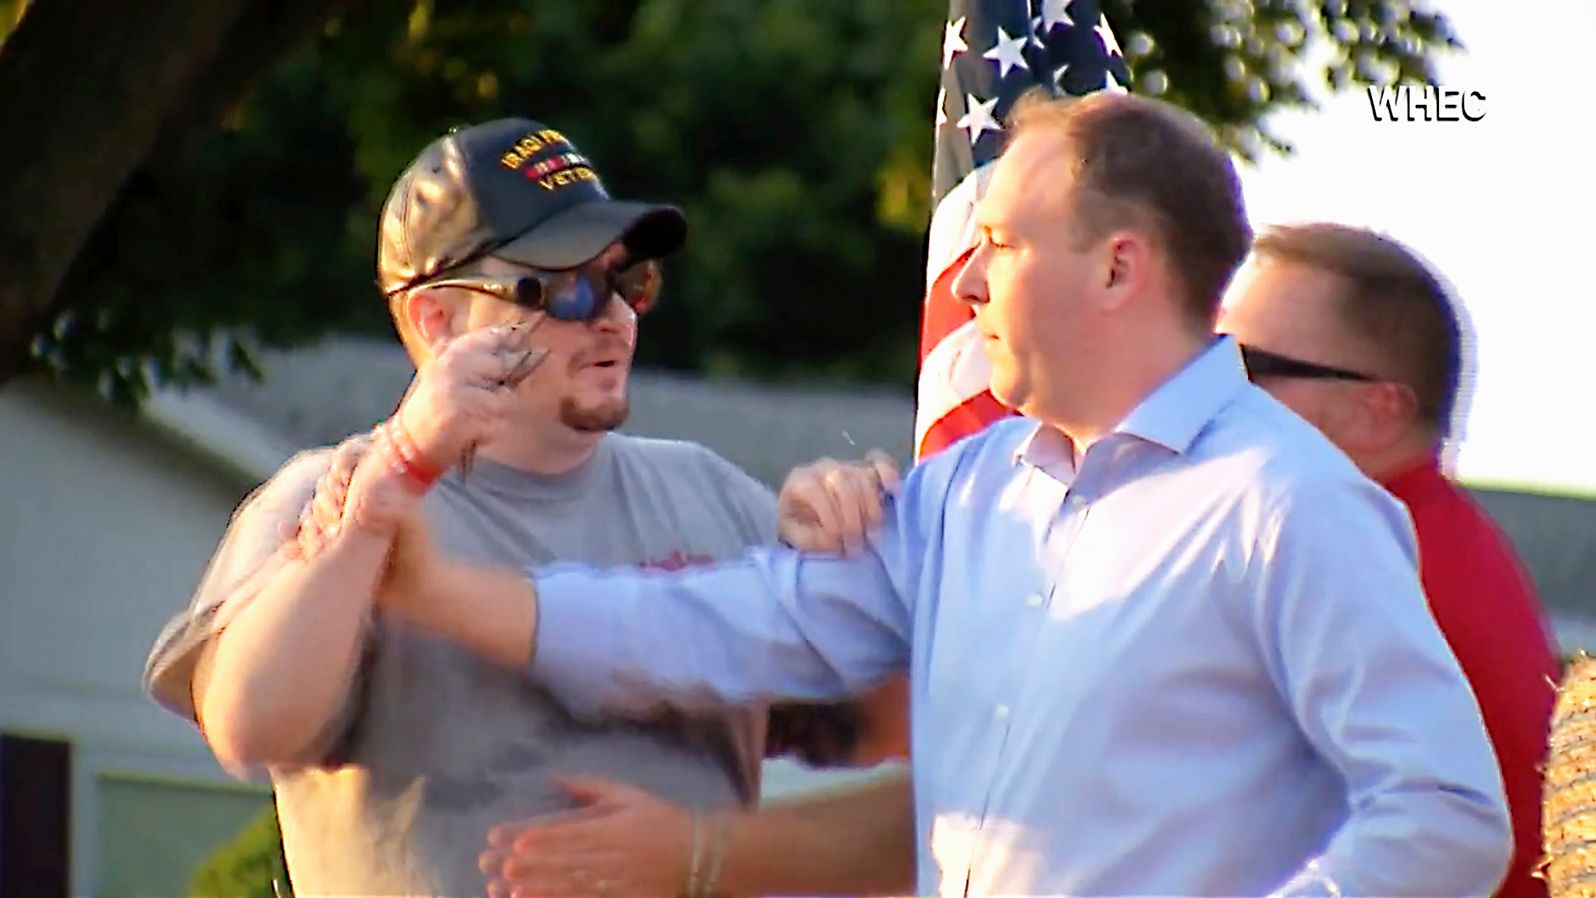 In this image taken from video provided by WHEC-TV, David Jakubonis, left, brandishes a sharp object as he attacks Rep. Lee Zeldin, right, as the Republican candidate for New York governor delivered a speech in Perinton, New York, Thursday, July 21, 2022.